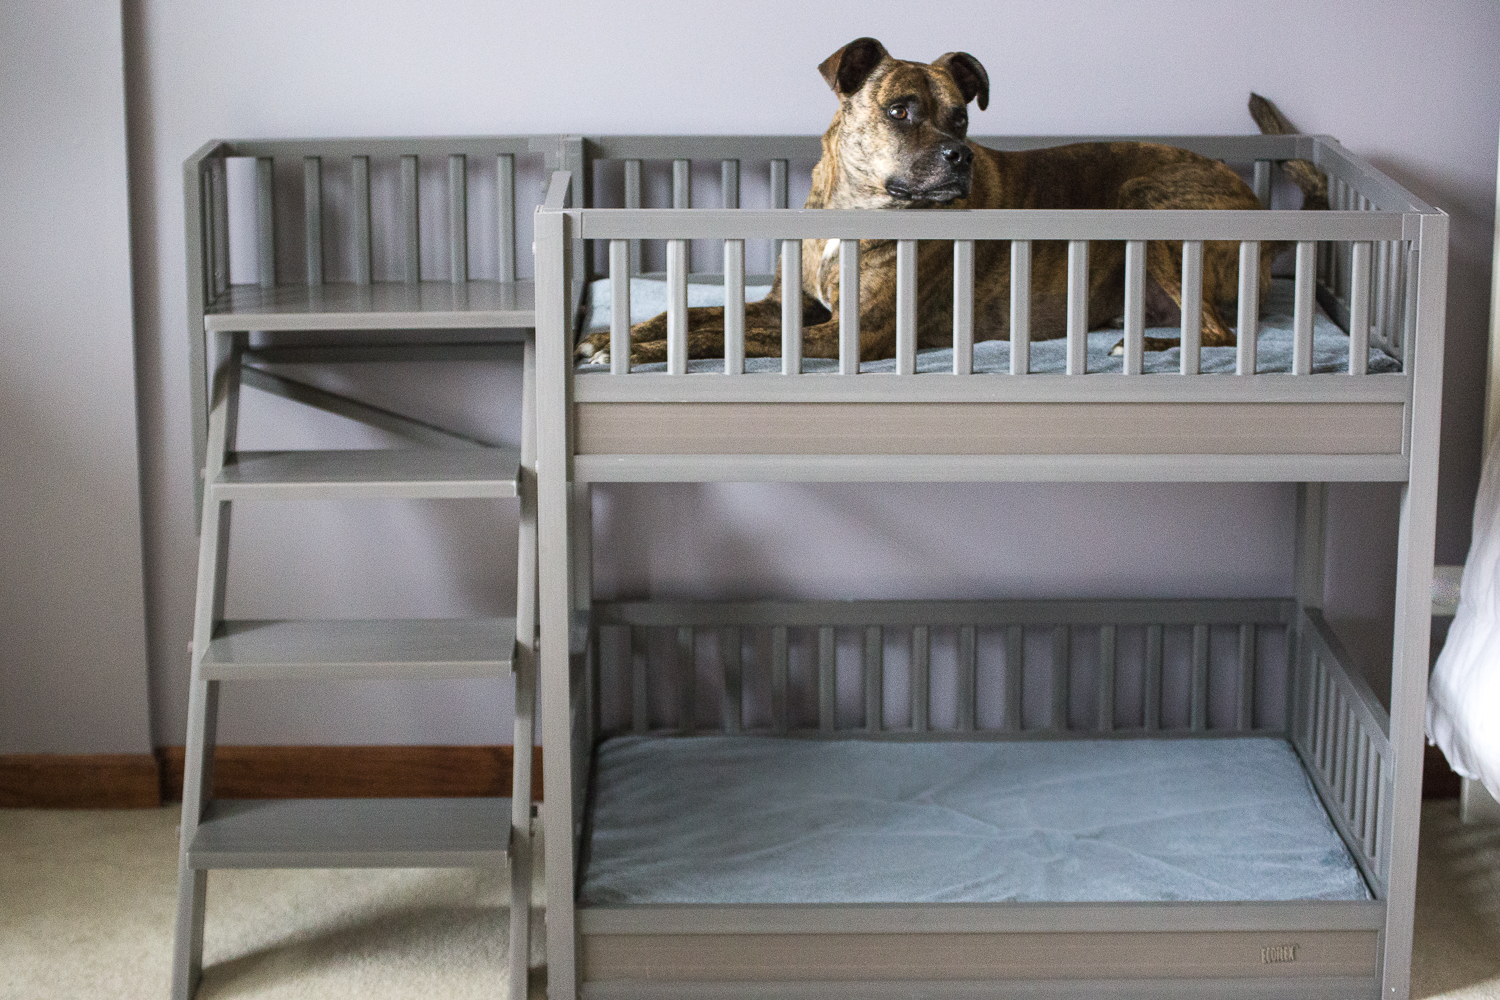 Ladder bed. +80 Adorable Dog Bed Designs That Will Surprise You - 30